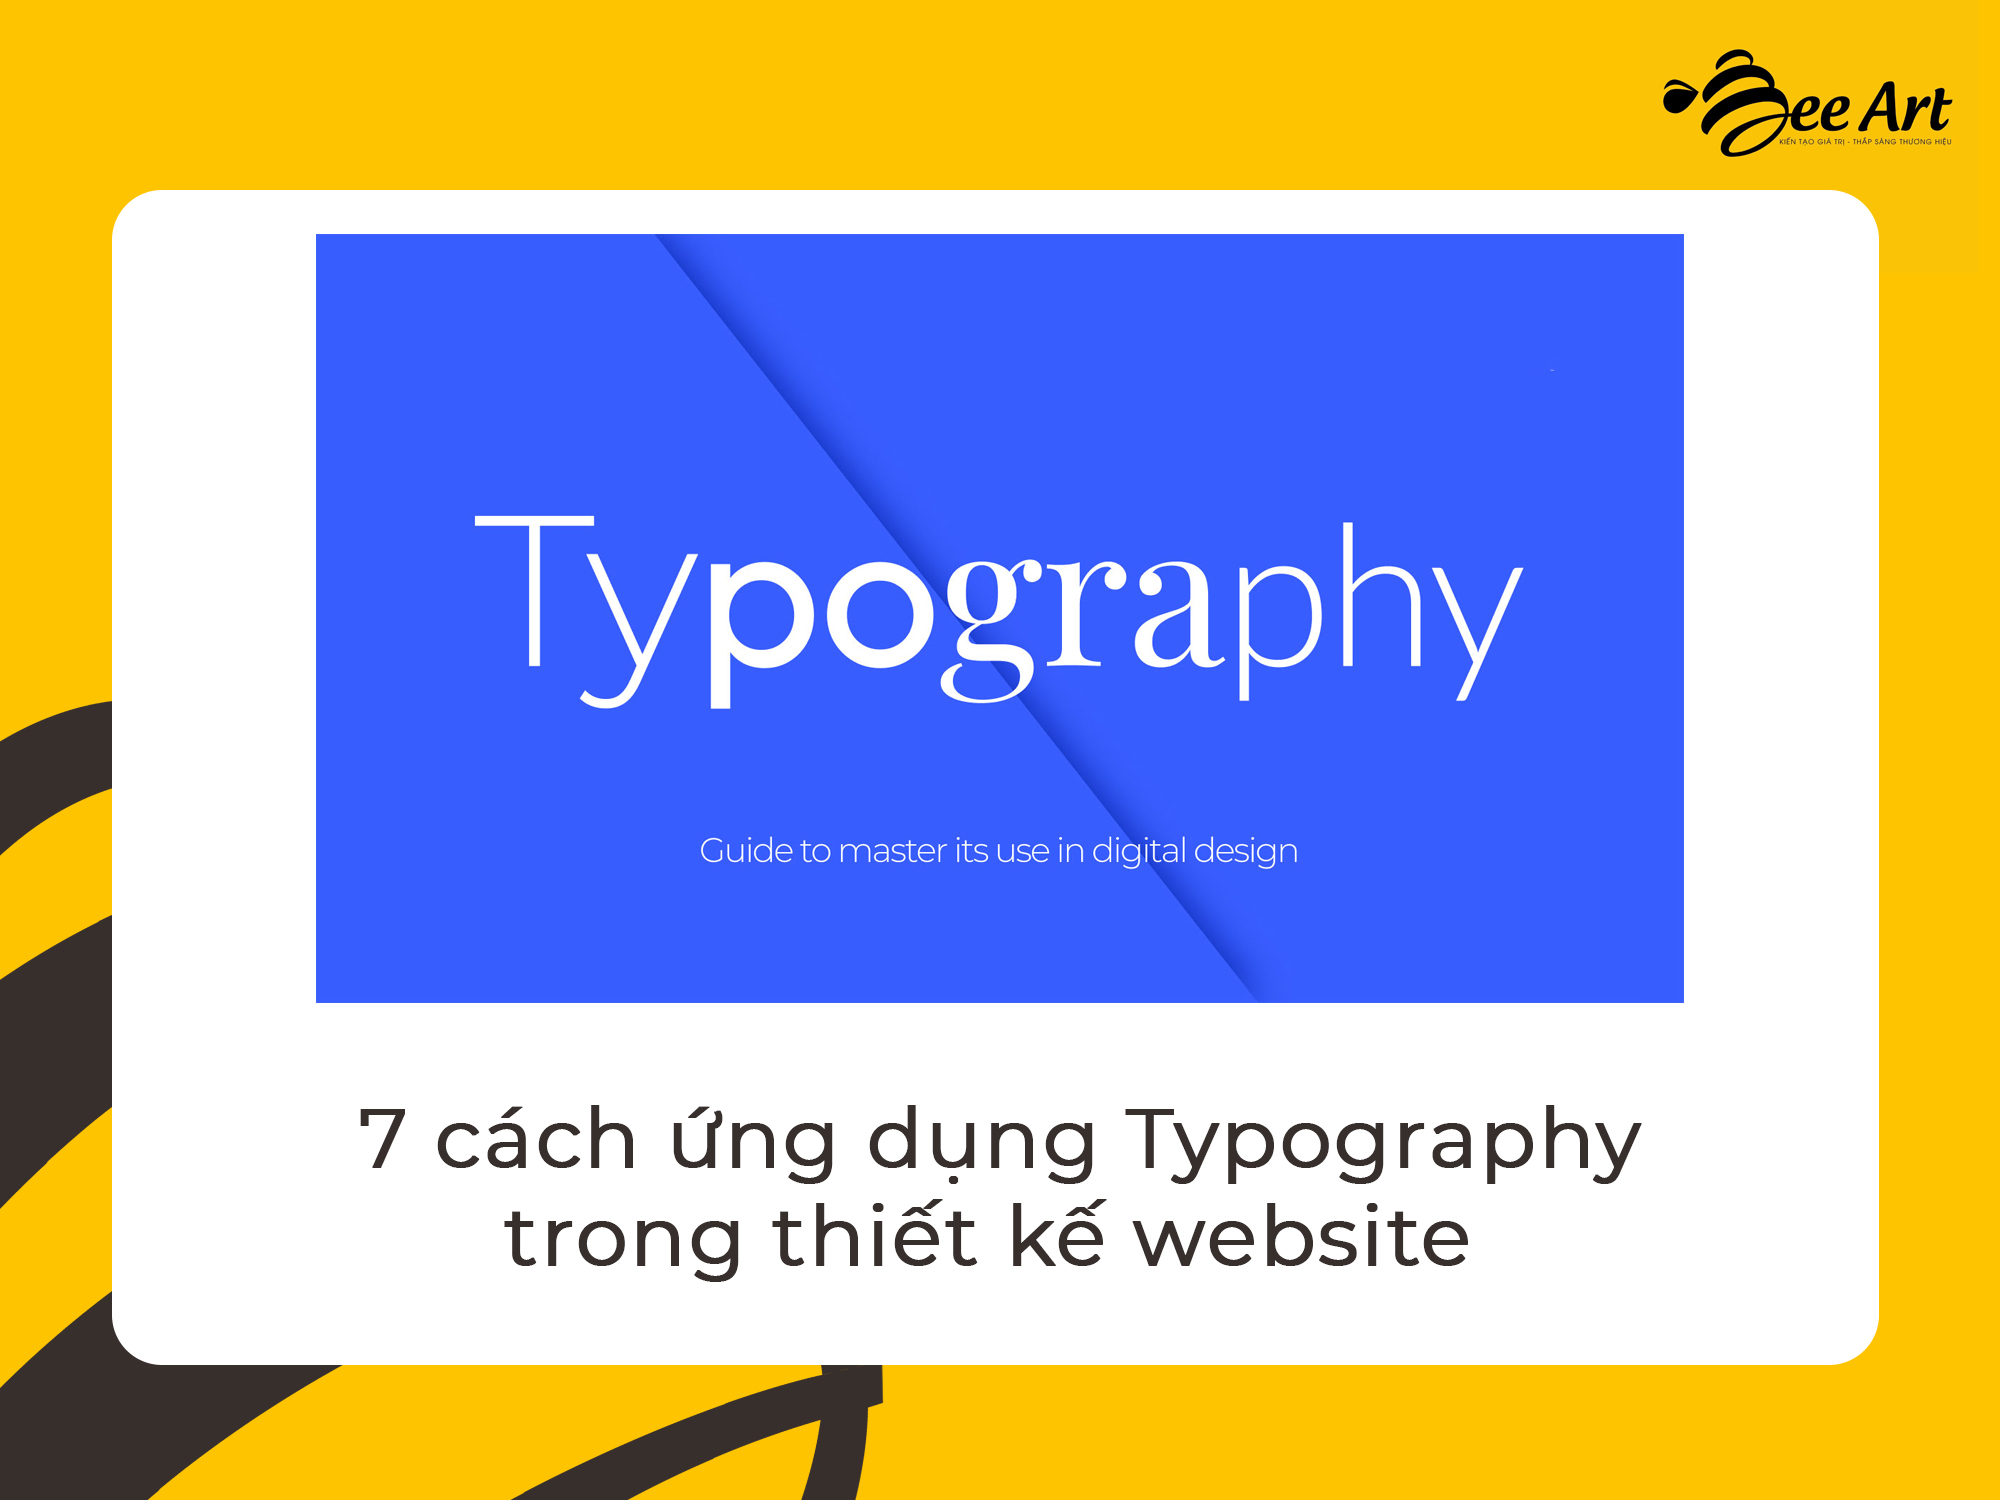 ứng dụng typography trong thiết kế website.jpg